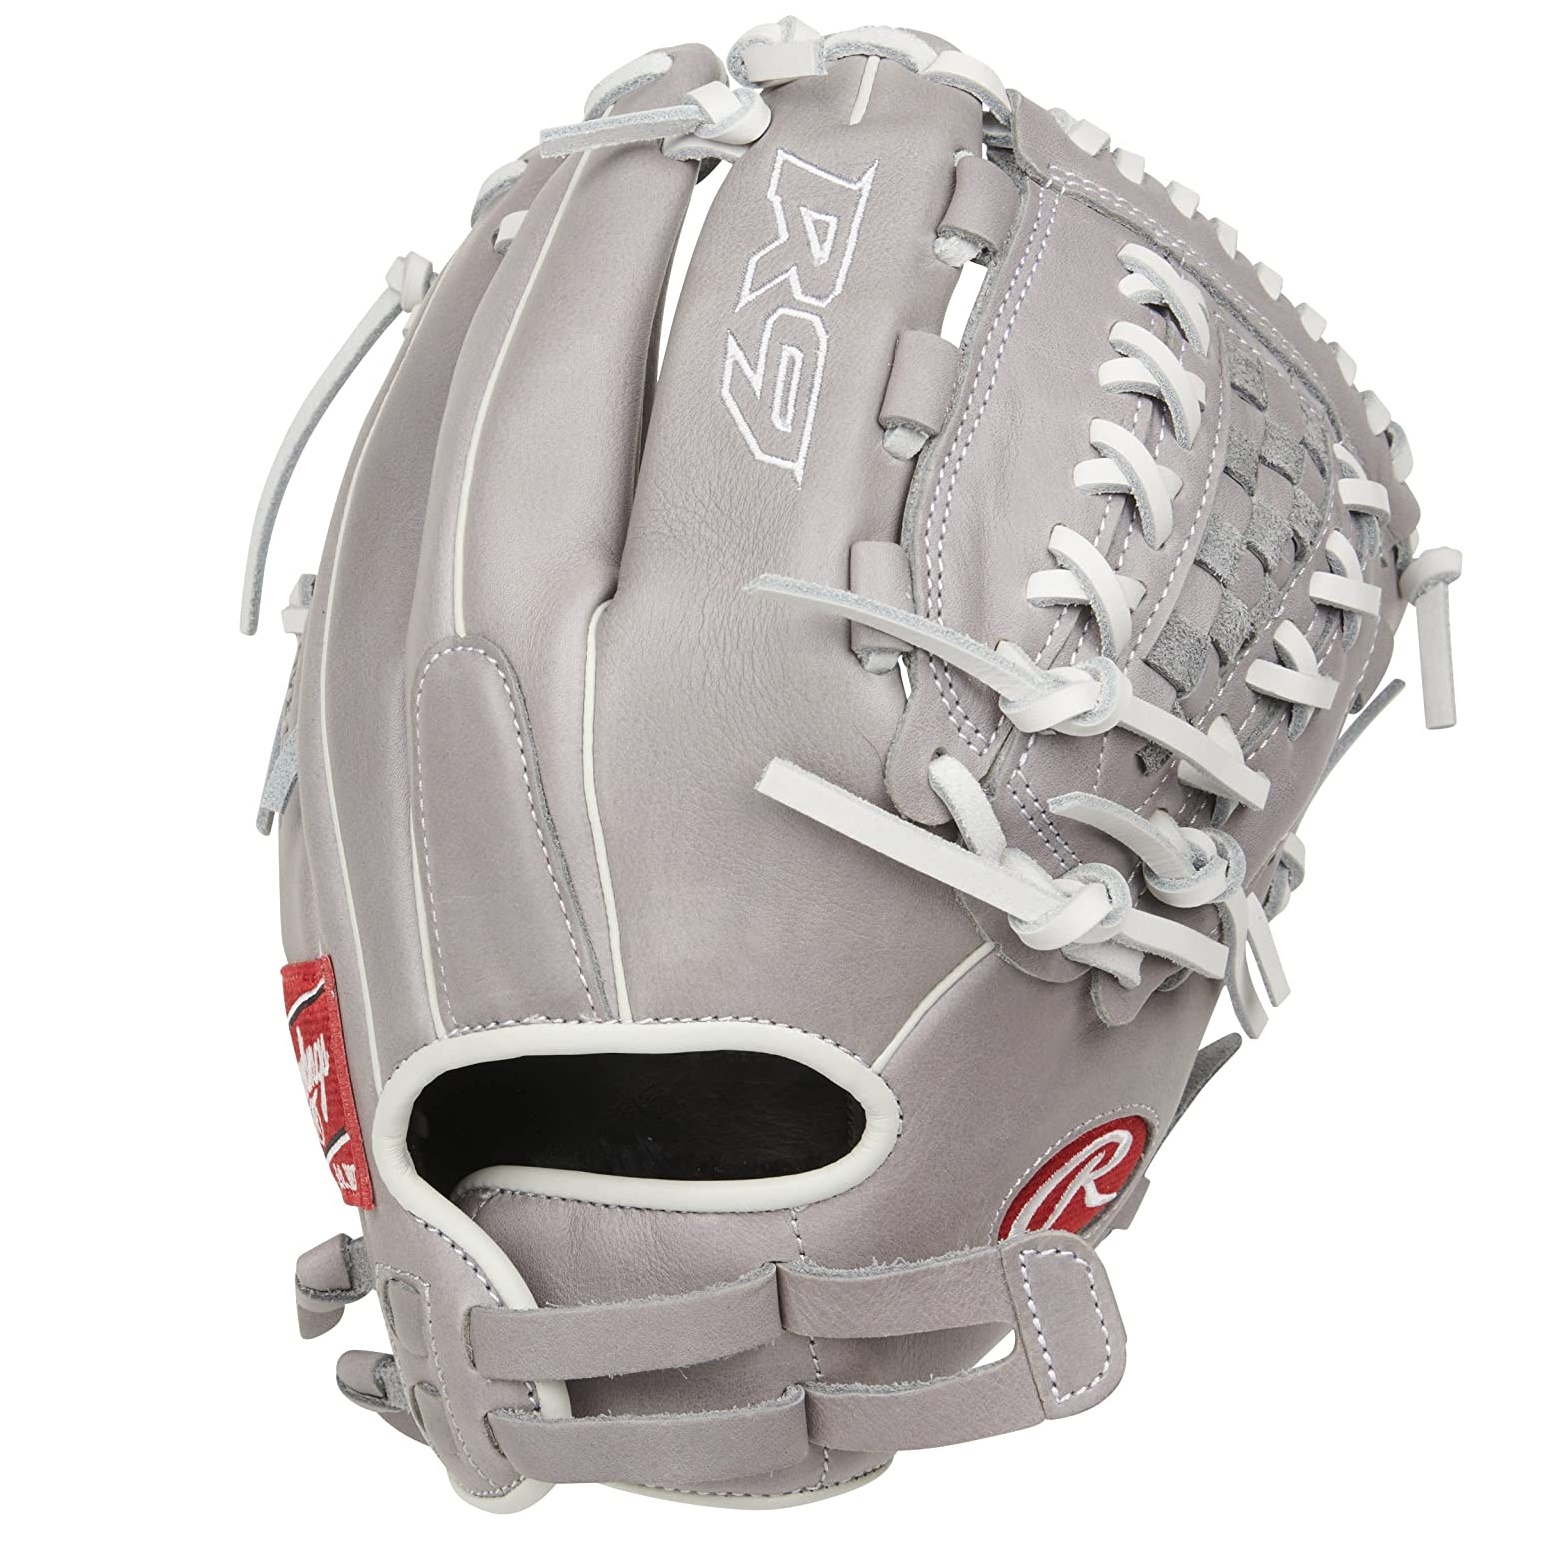 rawlings-r9-fastpitch-softball-glove-12-inch-finger-shift-right-hand-throw R9SB120FS-18G-RightHandThrow Rawlings  This series features soft durable all-leather shells designed to be game-ready.